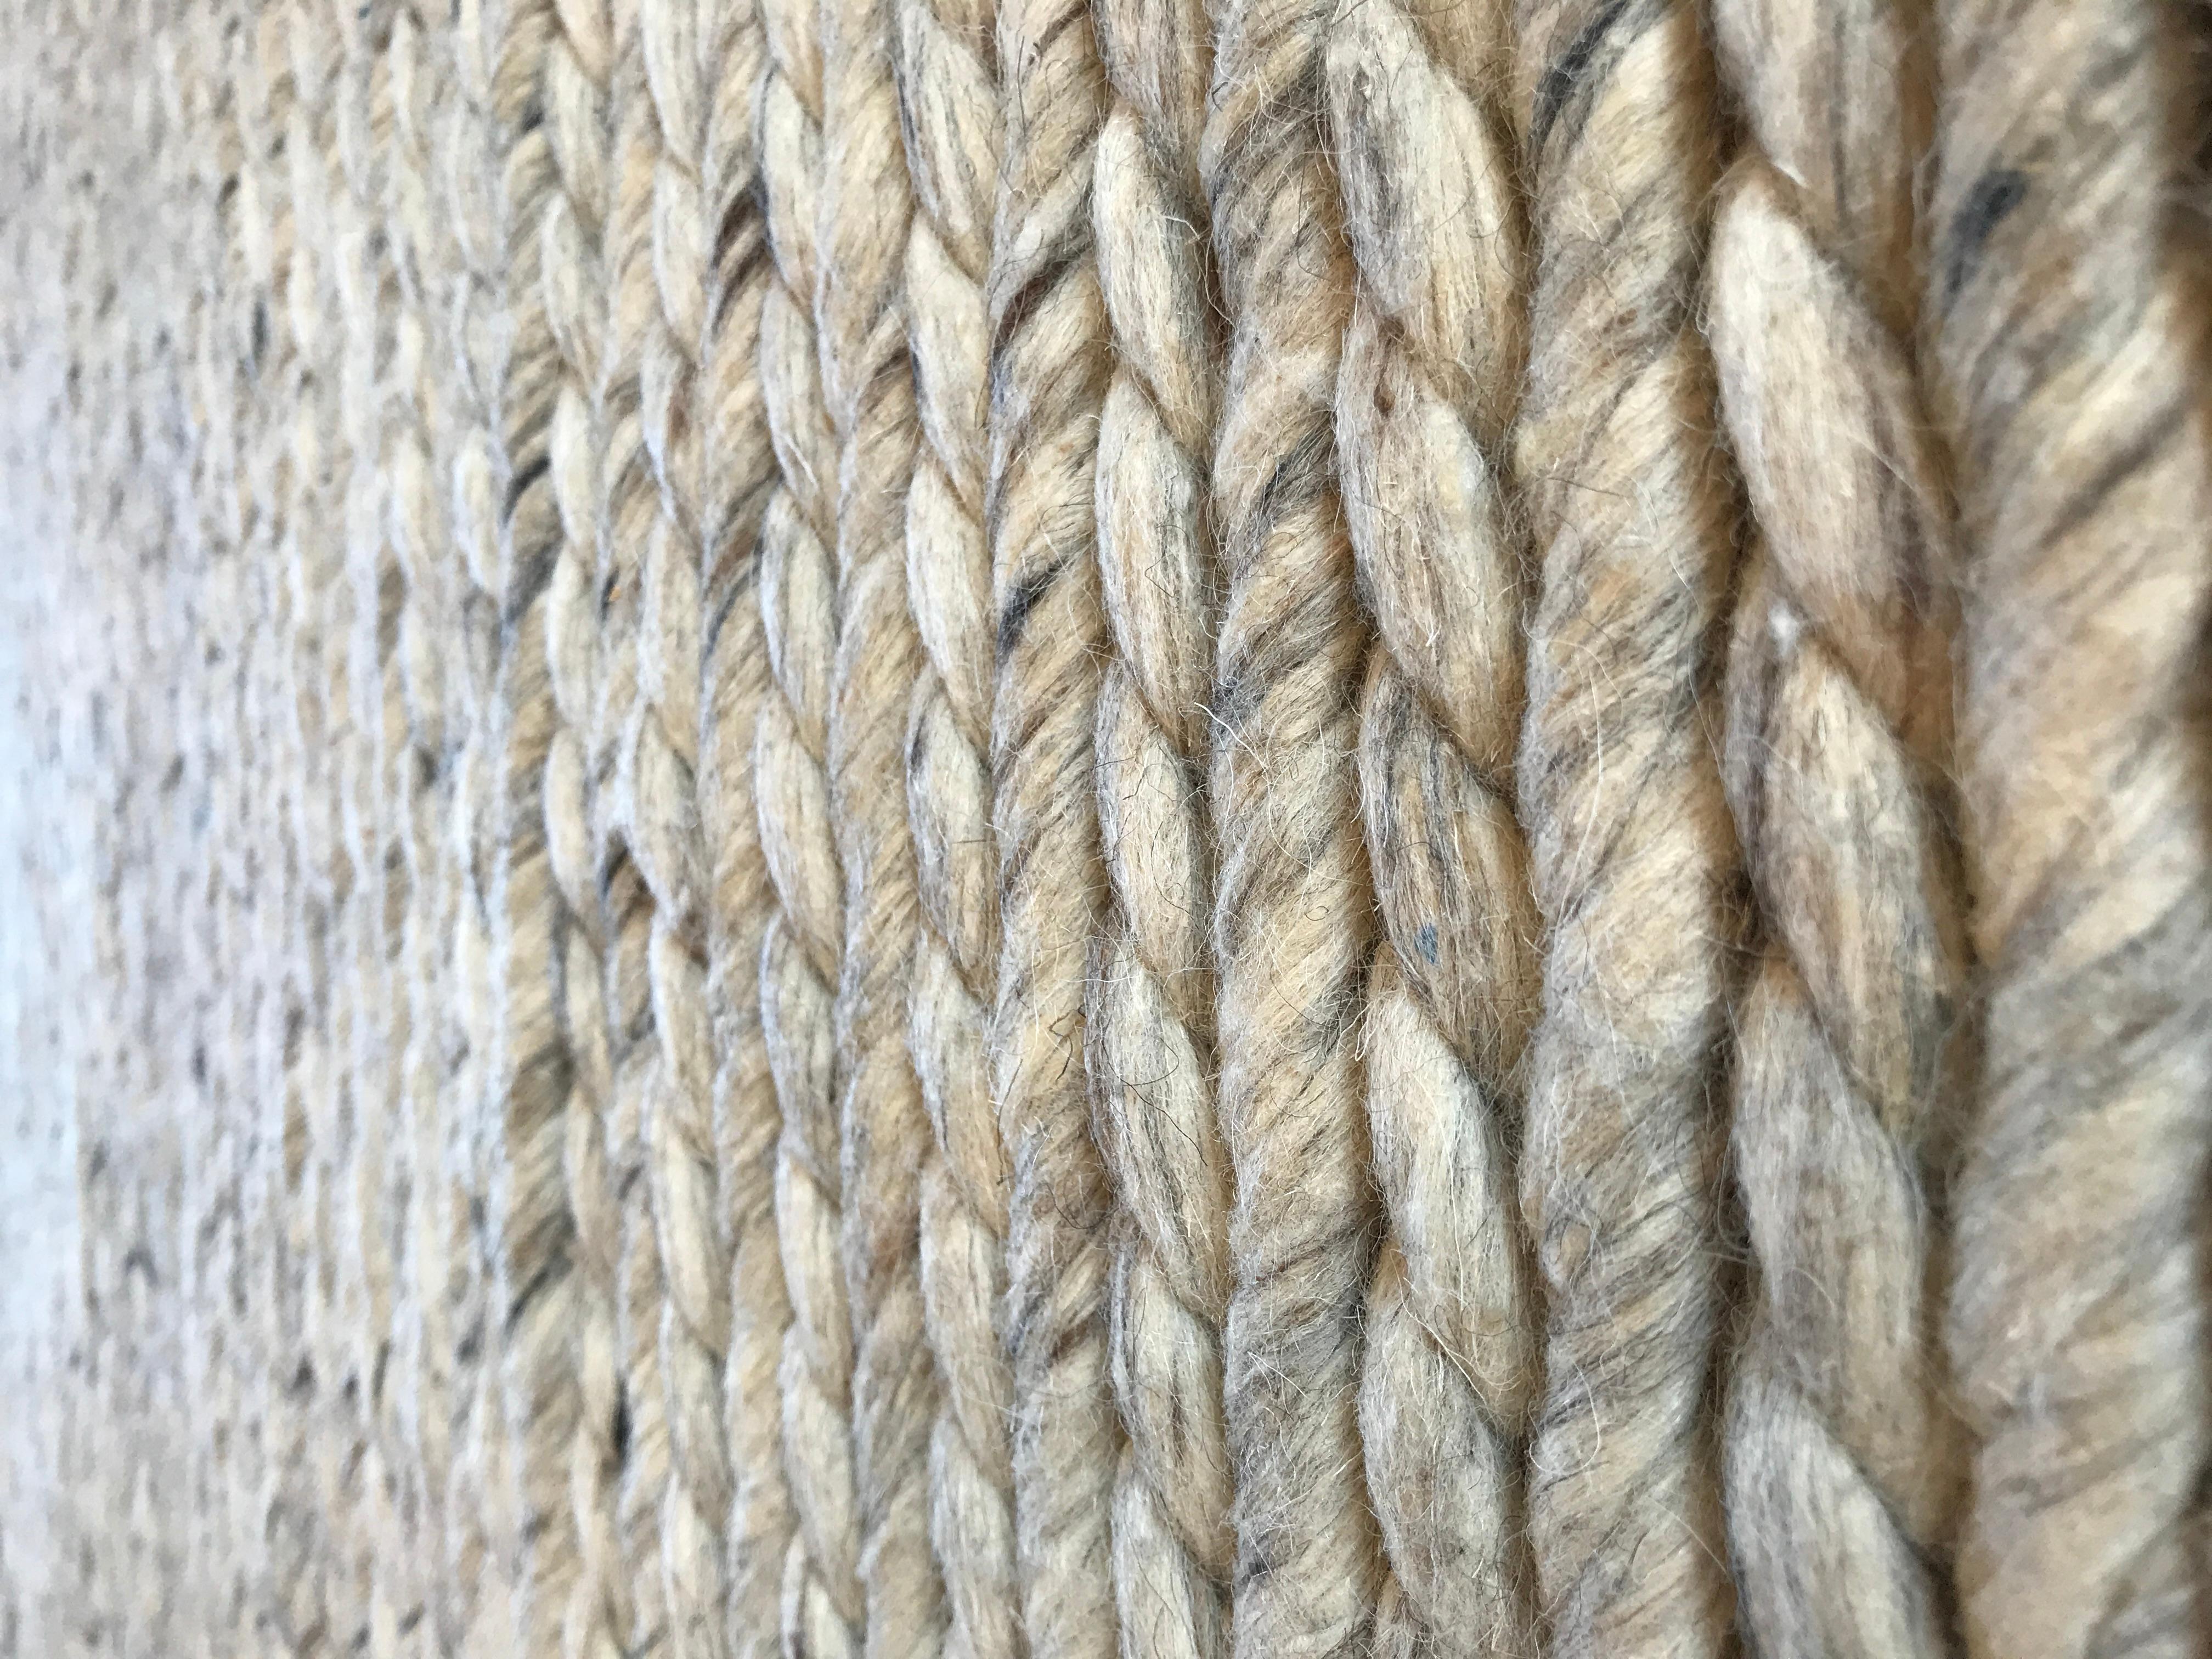 A thick and generous wool braid provides comfort underfoot and durability for high traffic areas. The neutral oatmeal coloring with subtle variations makes for a versatile piece, matching well with a wide range of colors and finishes. Hand knotted